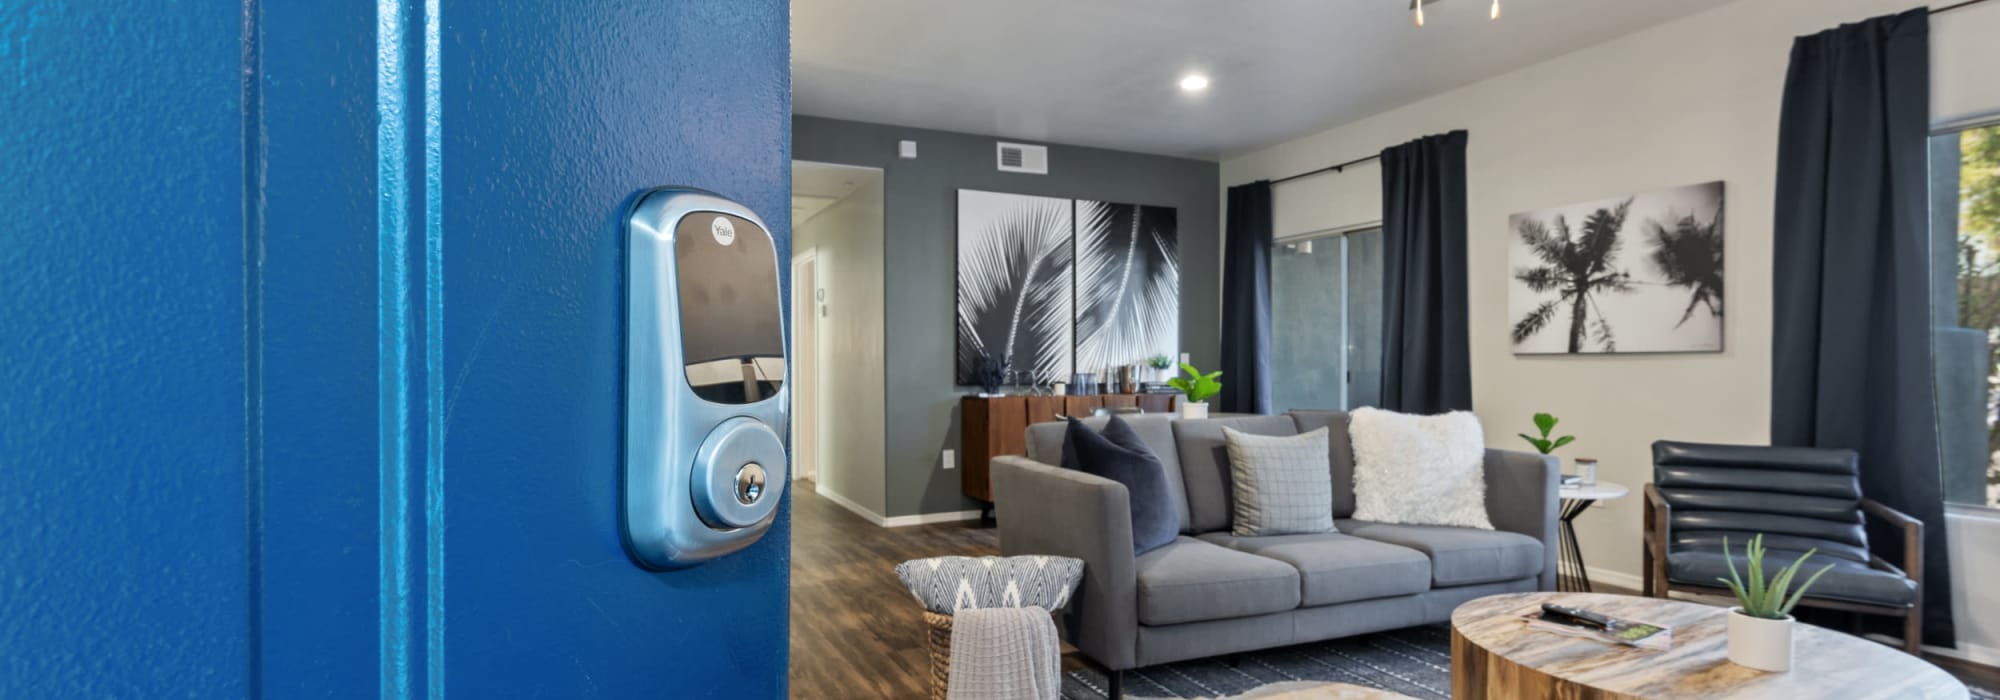 Smart lock on your door going into the living room where you can relax on the cozy couch at Fountain Hills, Arizona near Luna at Fountain Hills